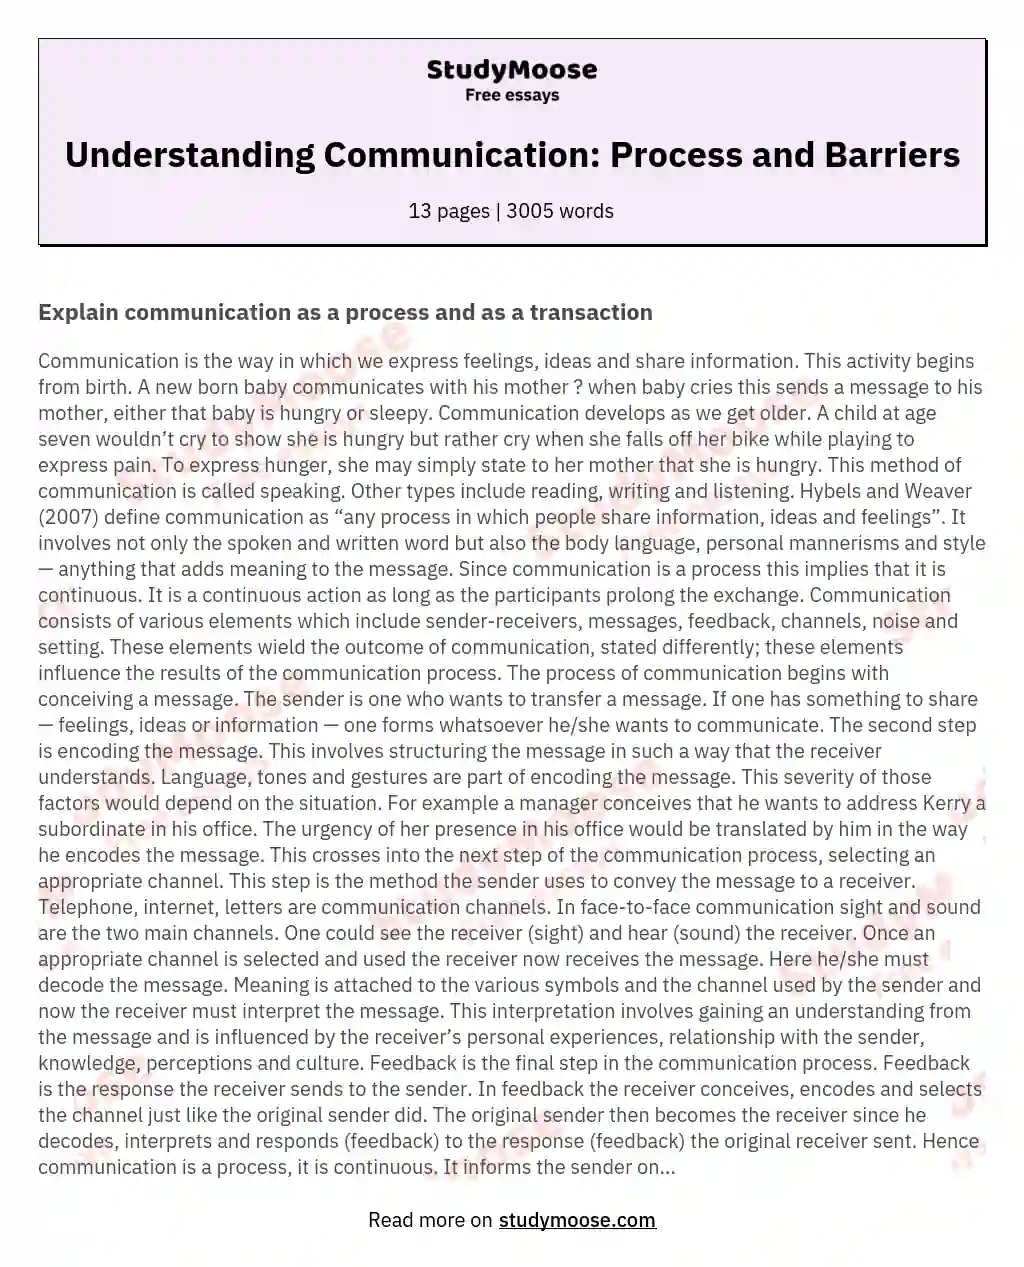 Understanding Communication: Process and Barriers essay